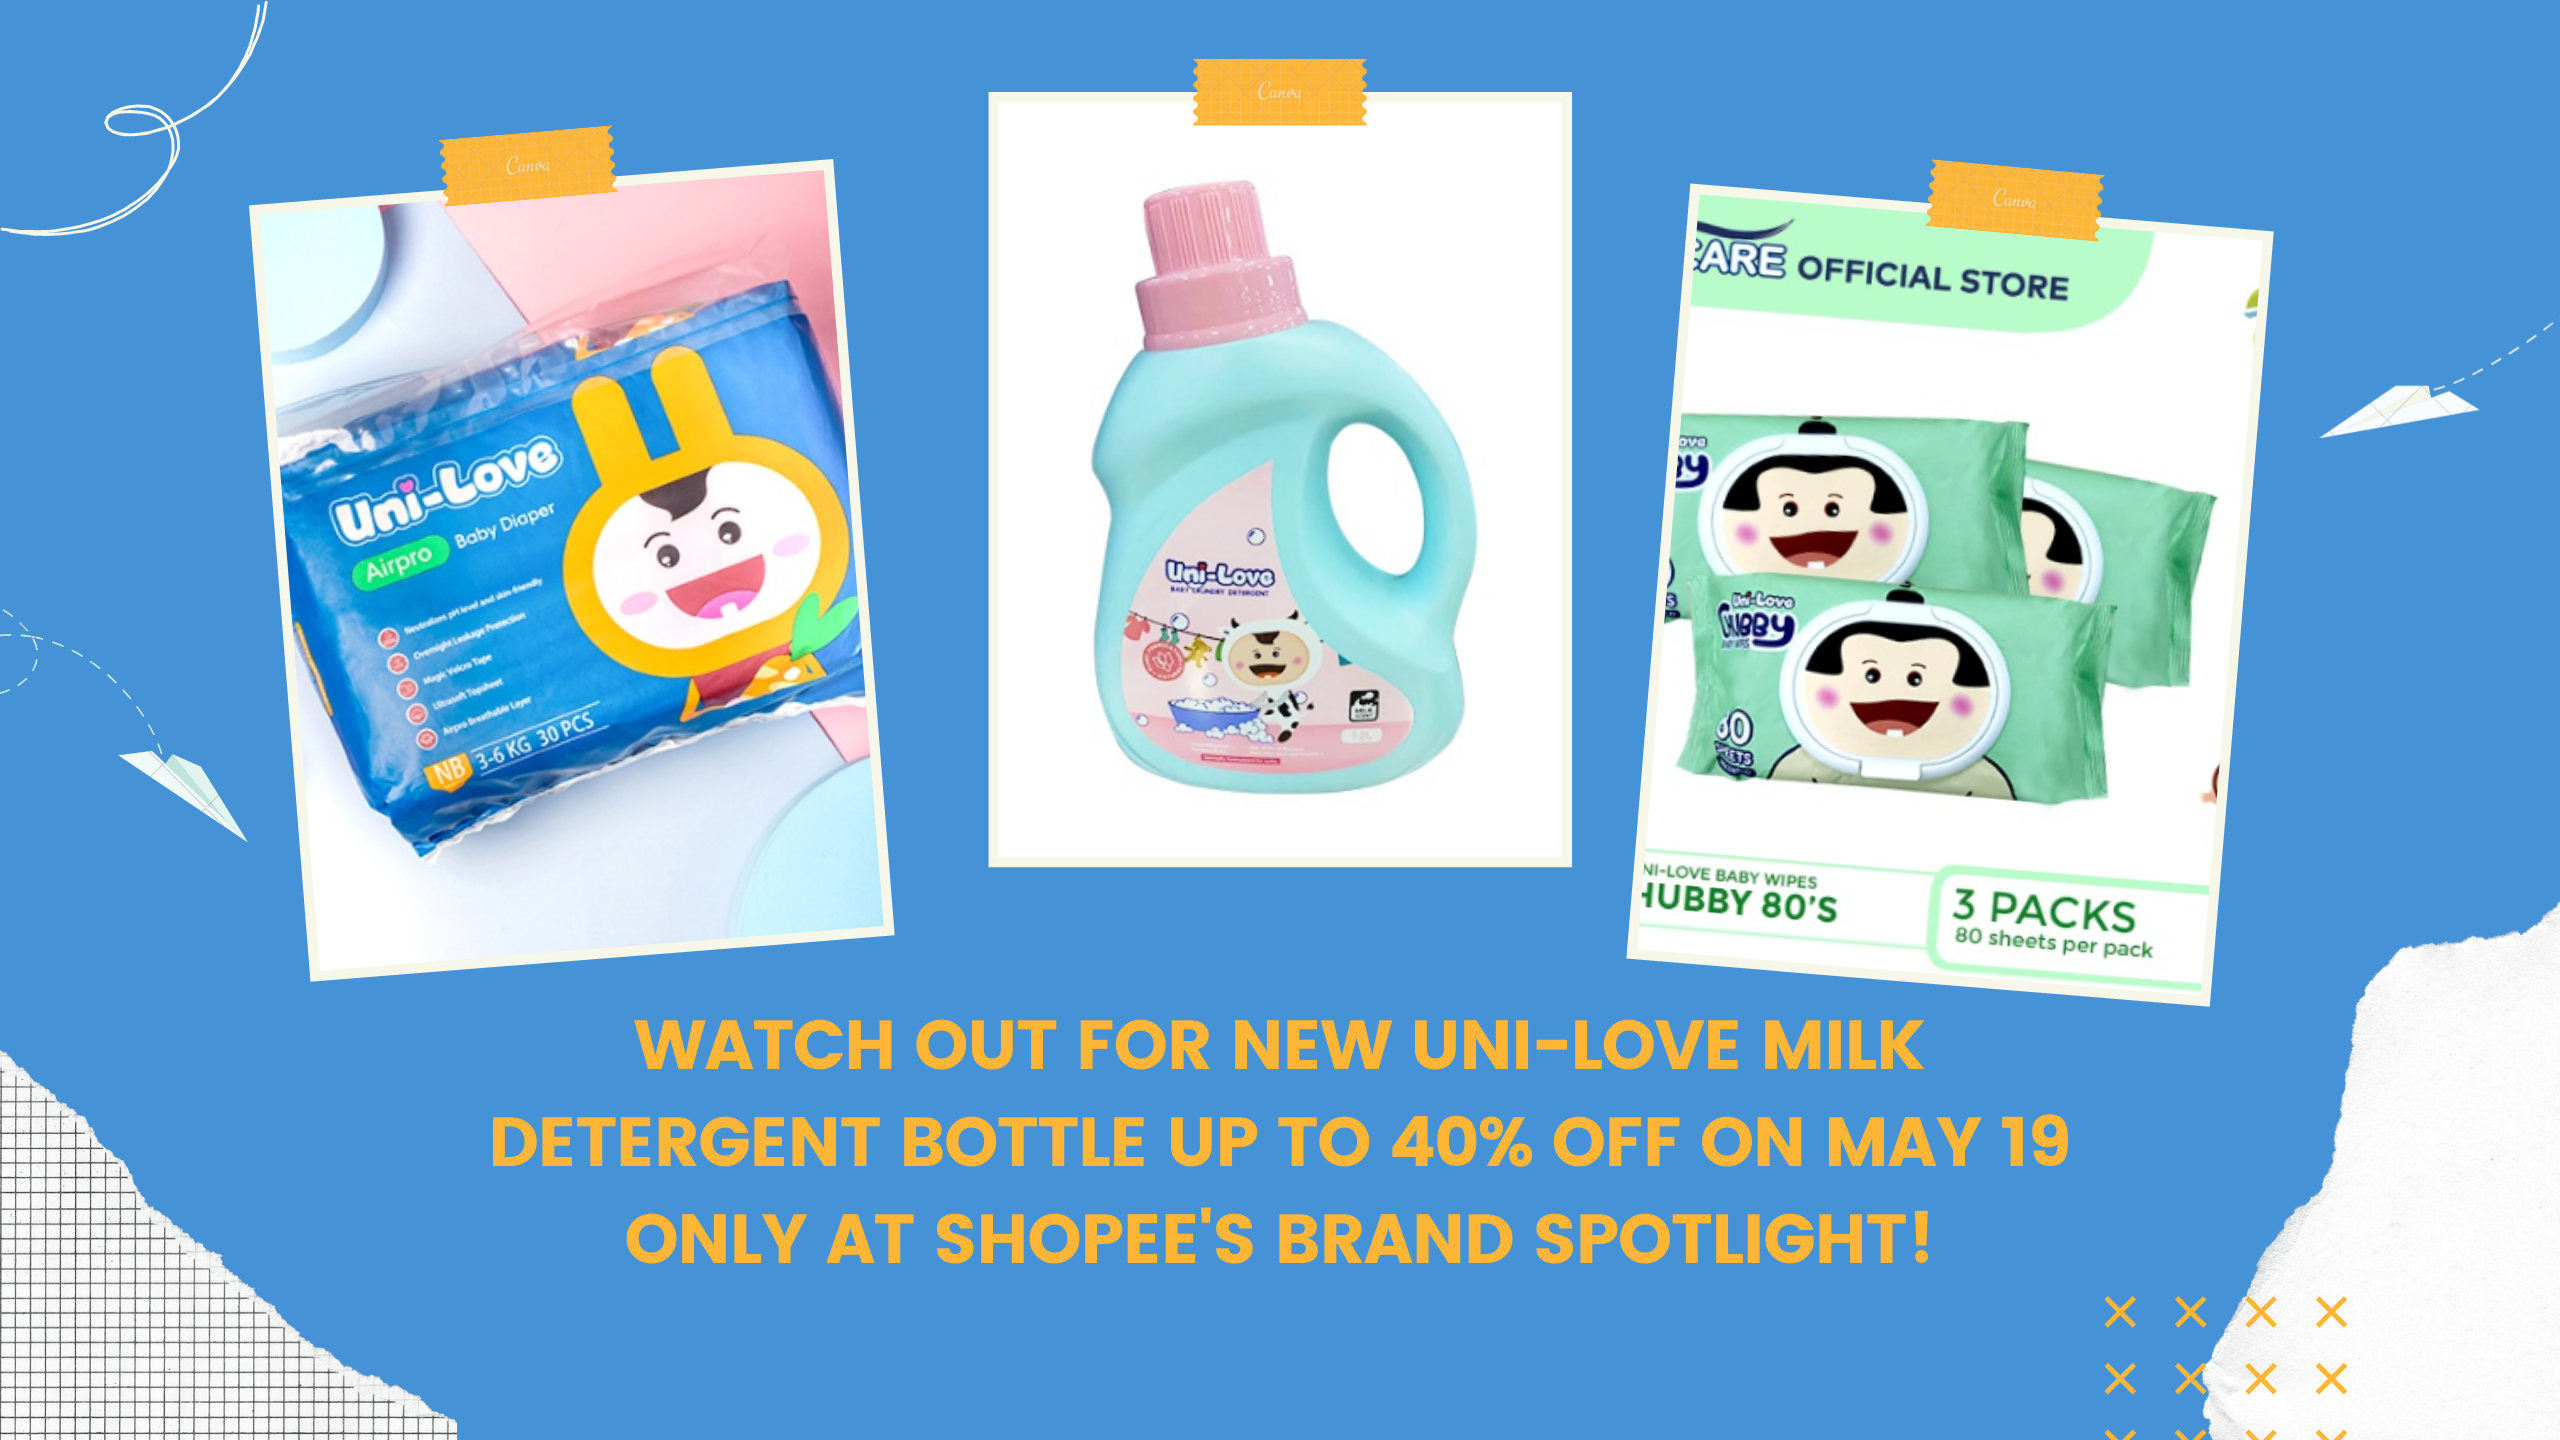 watch-out-for-new-uni-love-milk-detergent-bottle-up-to-40-off-on-may-19-only-at-shopees-brand-spotlight